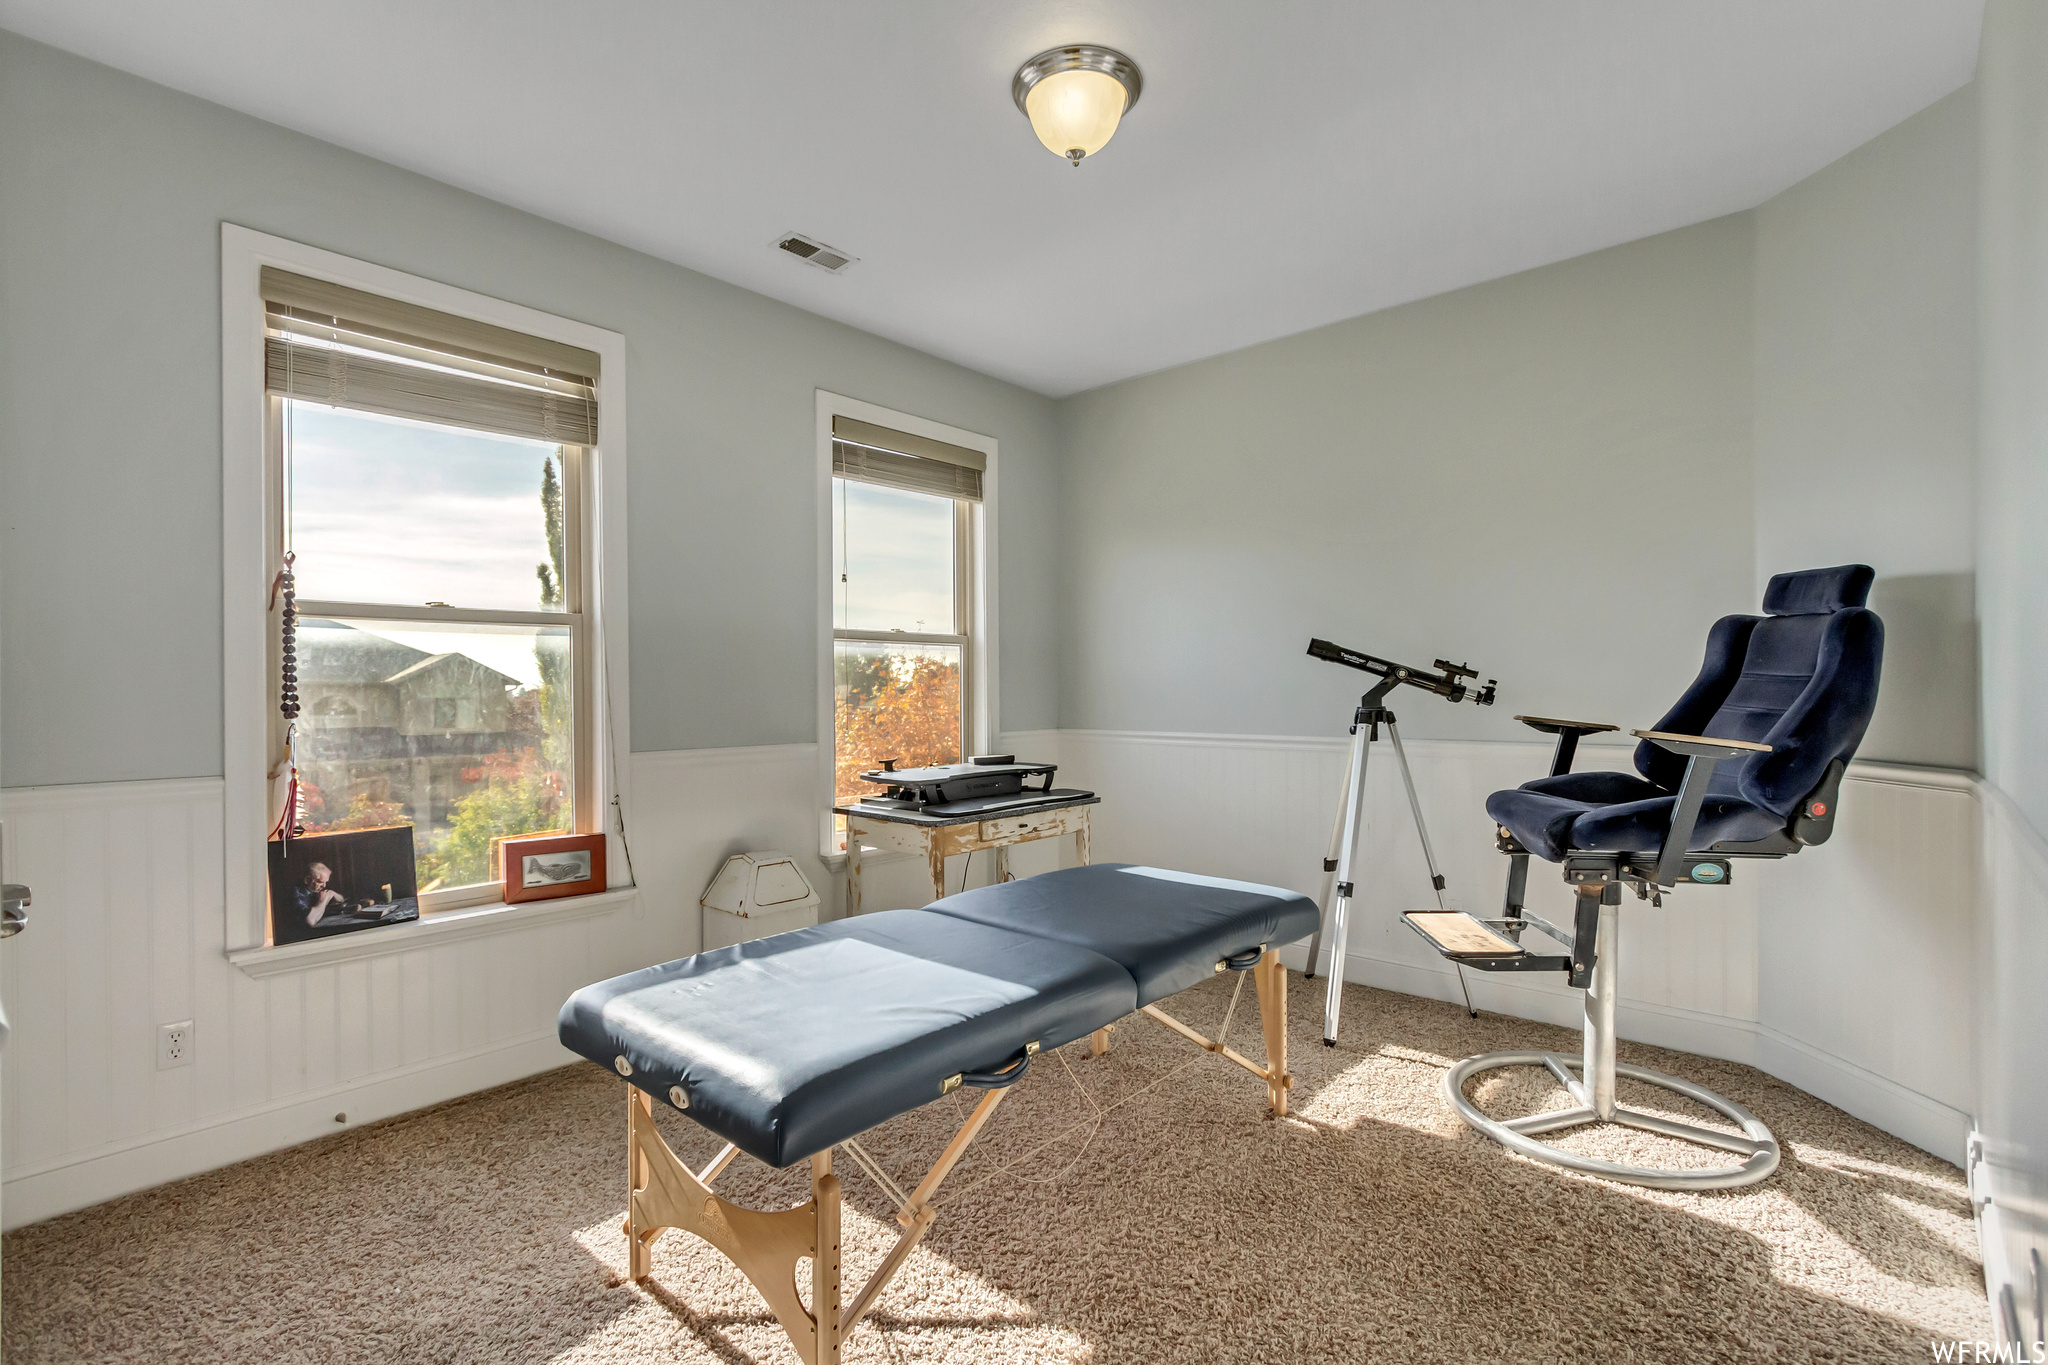 Workout room featuring plenty of natural light and light colored carpet